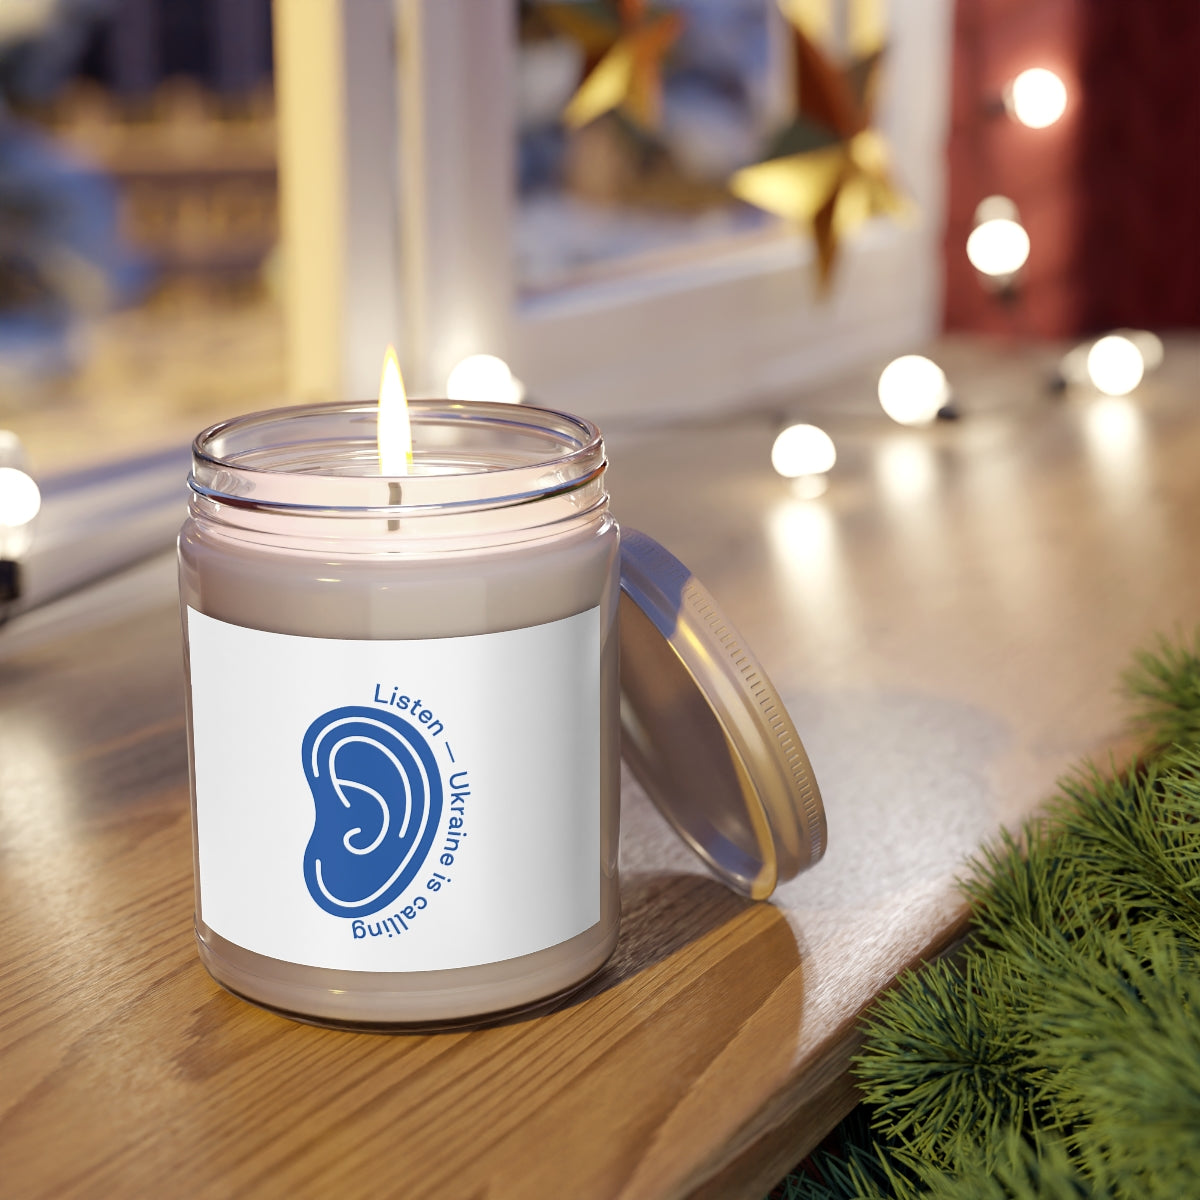 Listen To Ukraine's Call - 100% Ecological Soy Wax Scented Candle (lasts 50-60h)